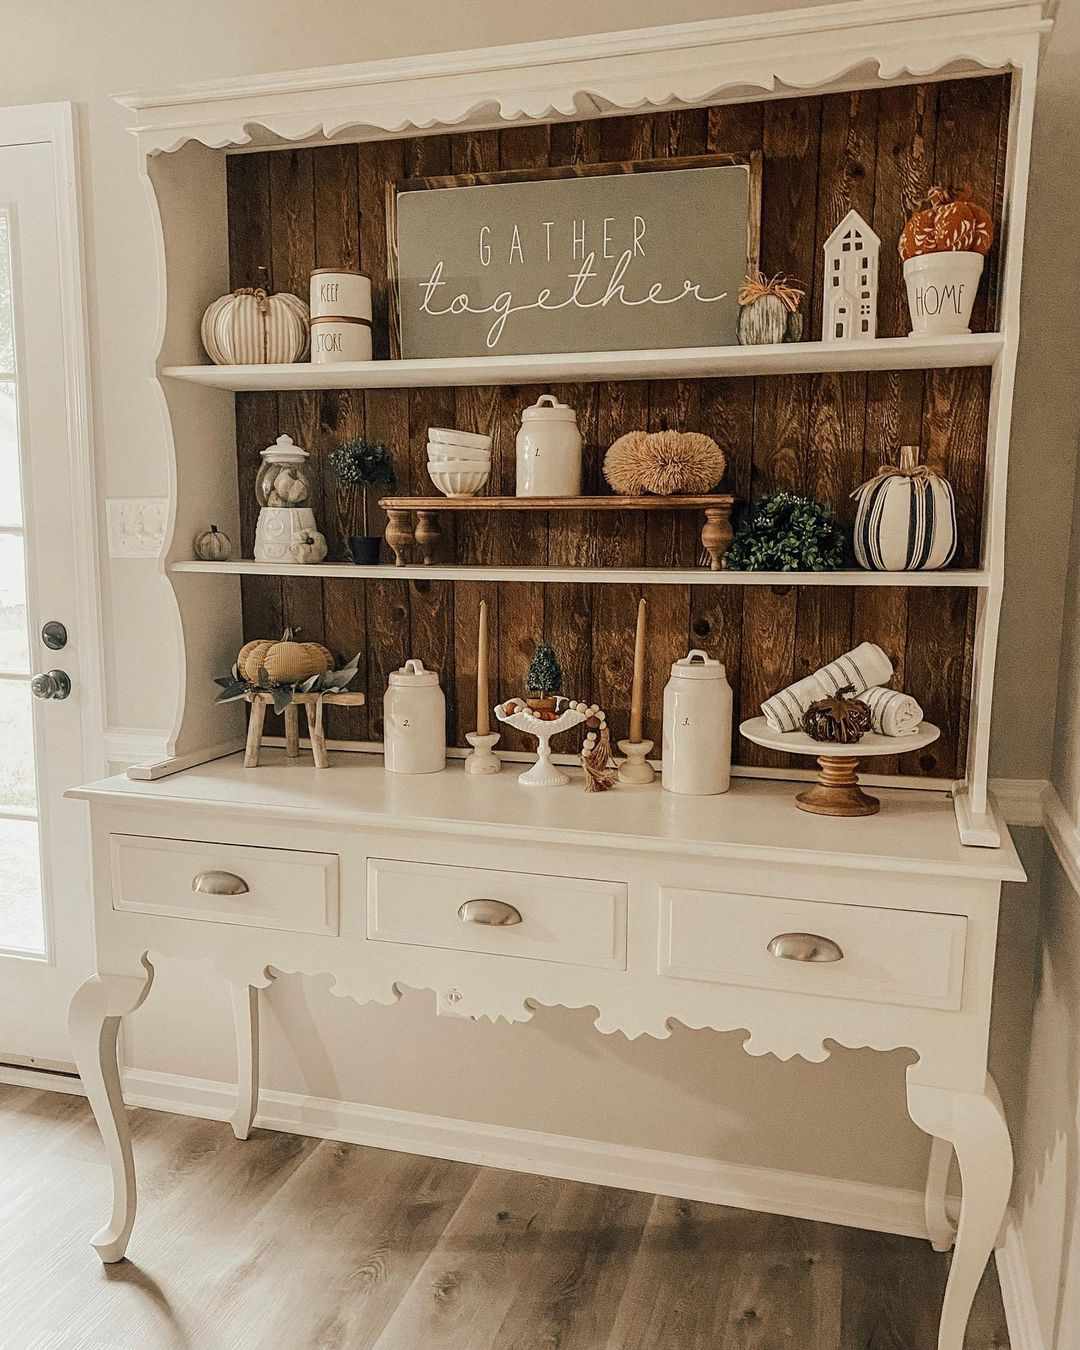 Fall decor displayed in a kitchen hutch